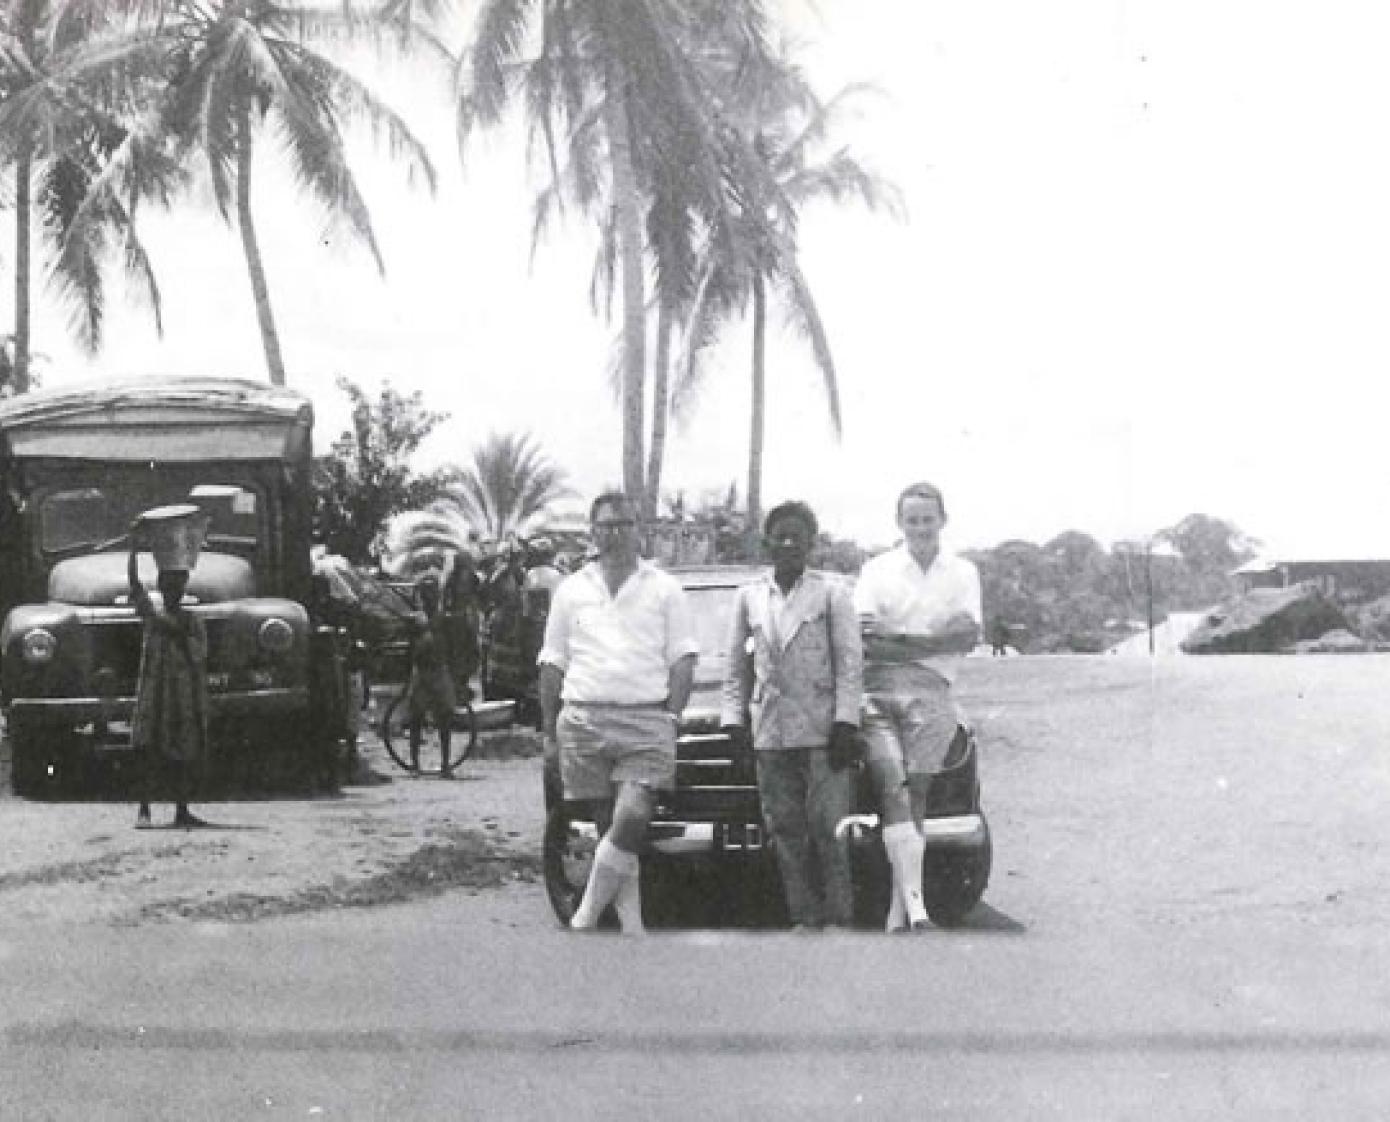 An old photo depicting Knight Franks move abroad, featuring a group of men stood by a car near some palm trees